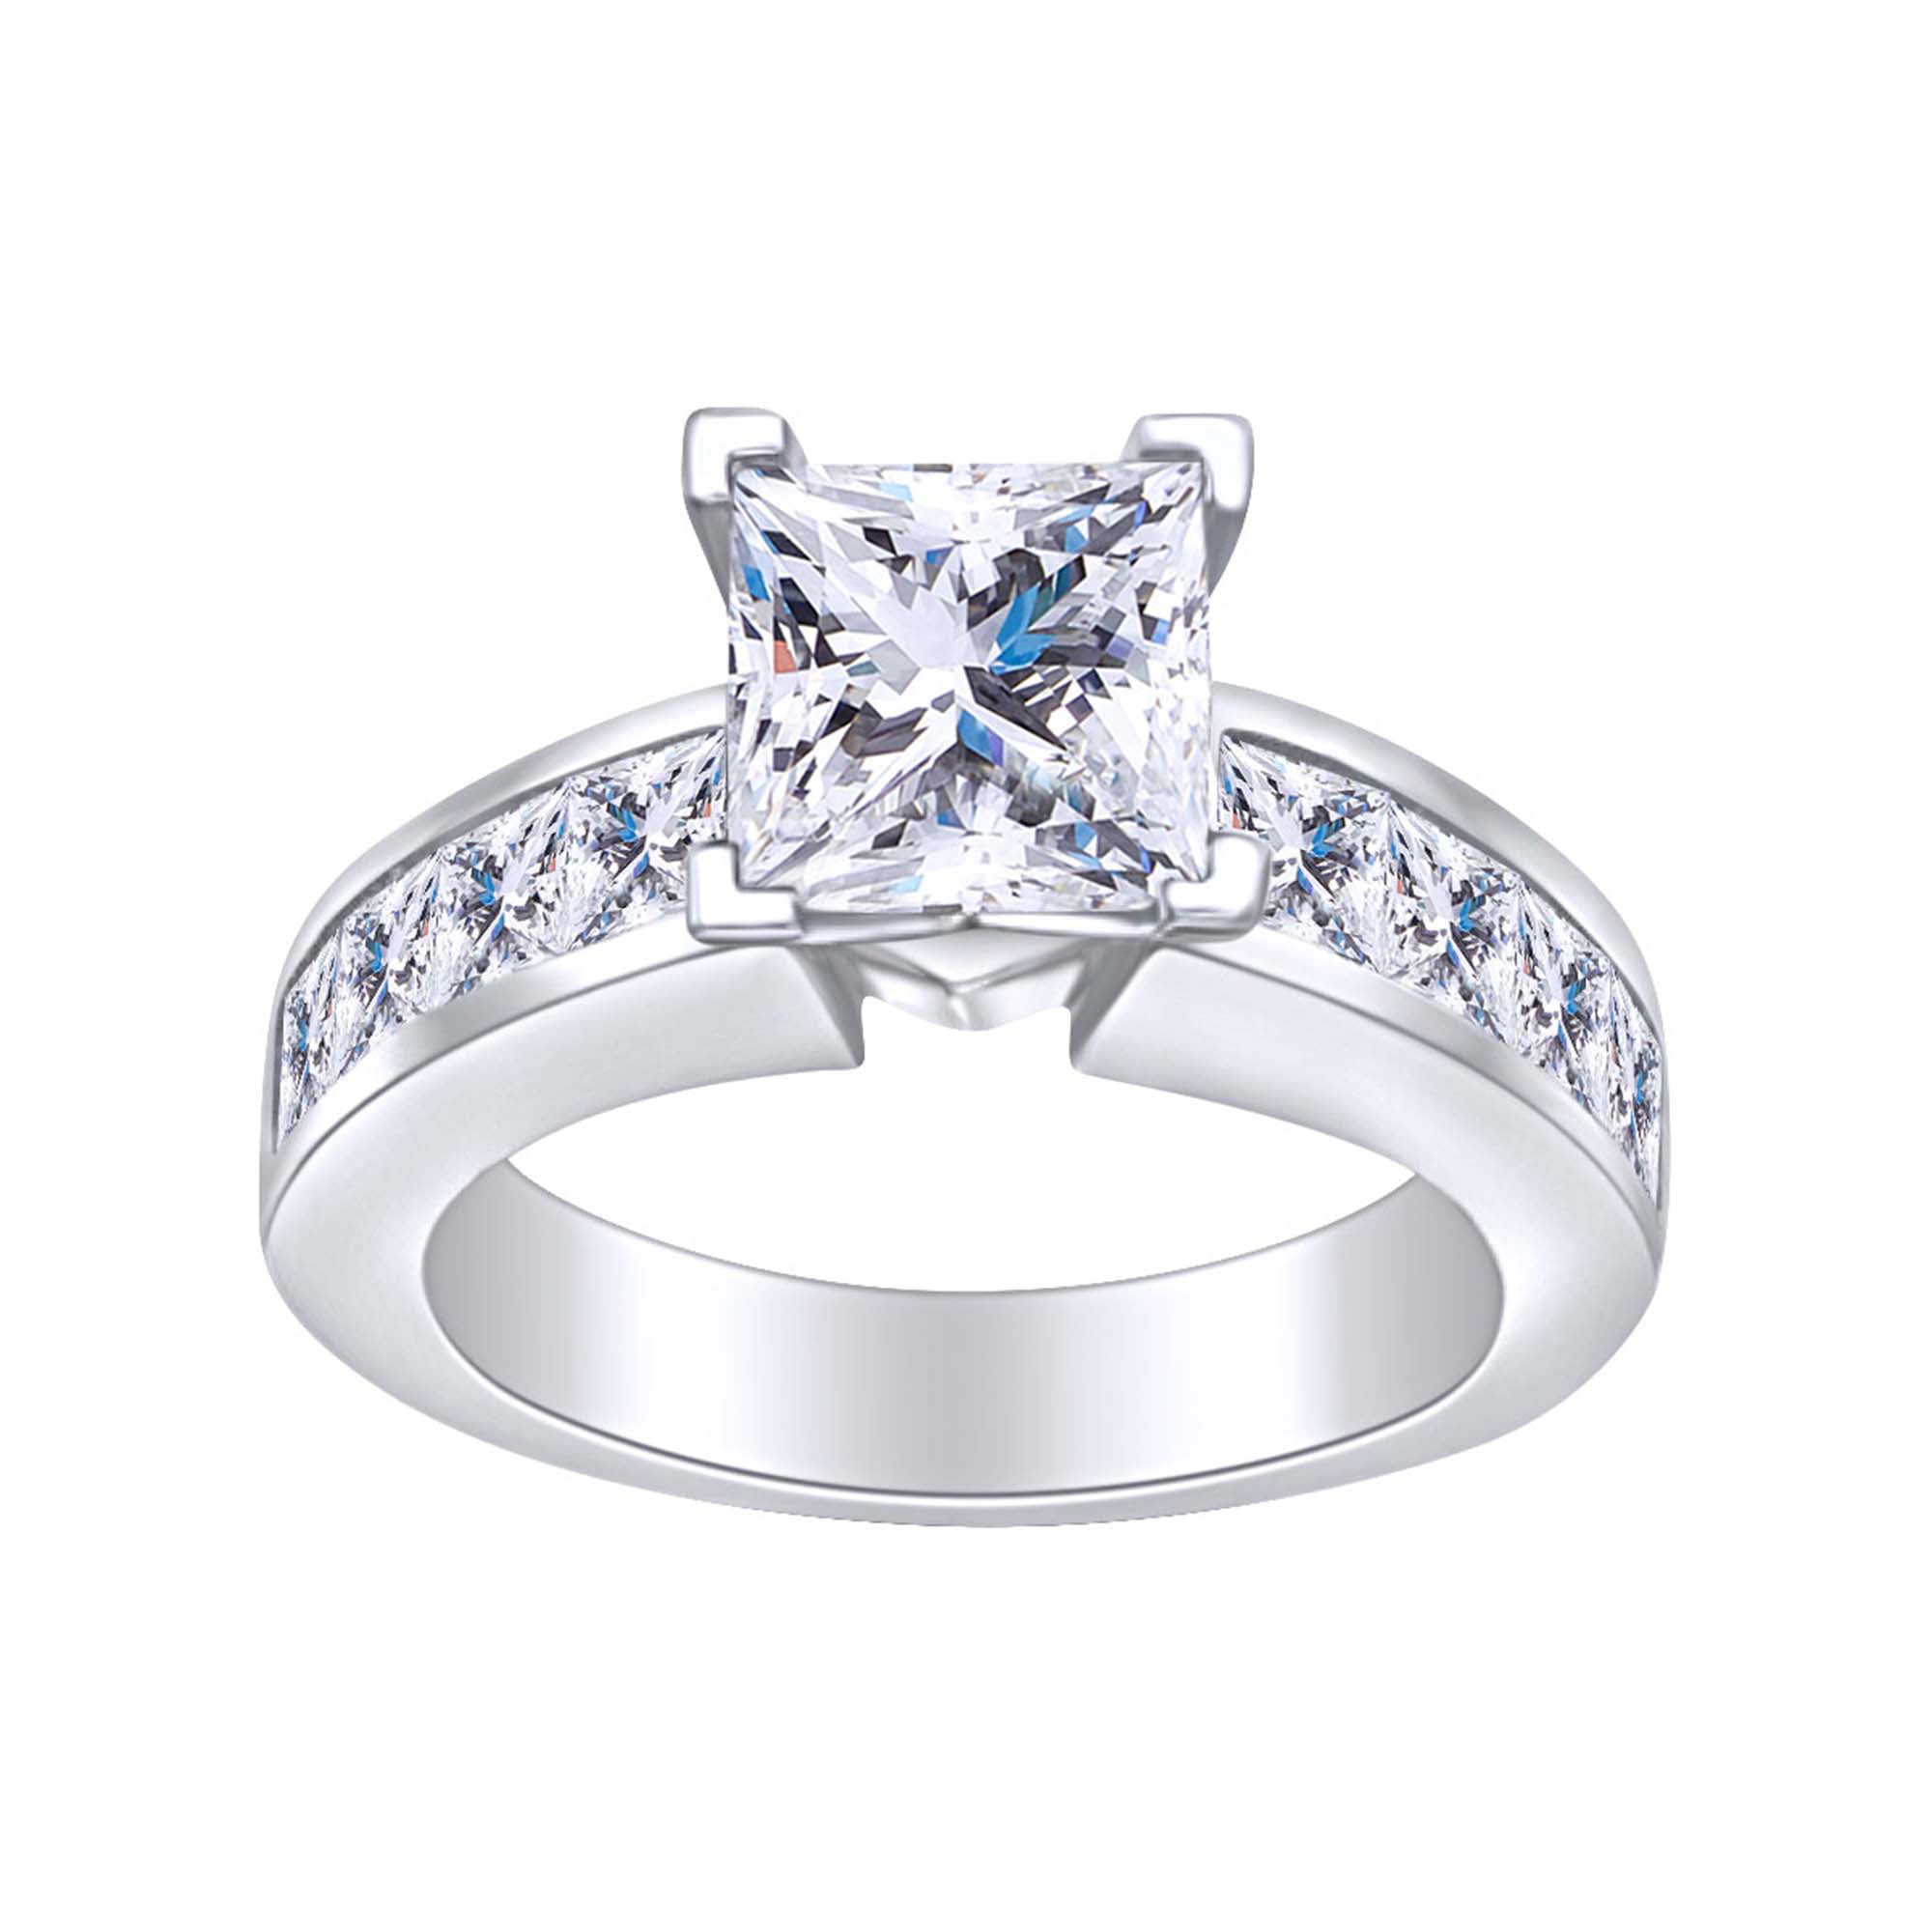 Ashi 1/2 Ctw Diamond Engagement Ring with 1/4 Ct Round Cut Center Stone in  14K White Gold 26923GJFCWG-LE-RD | Grogan Jewelers